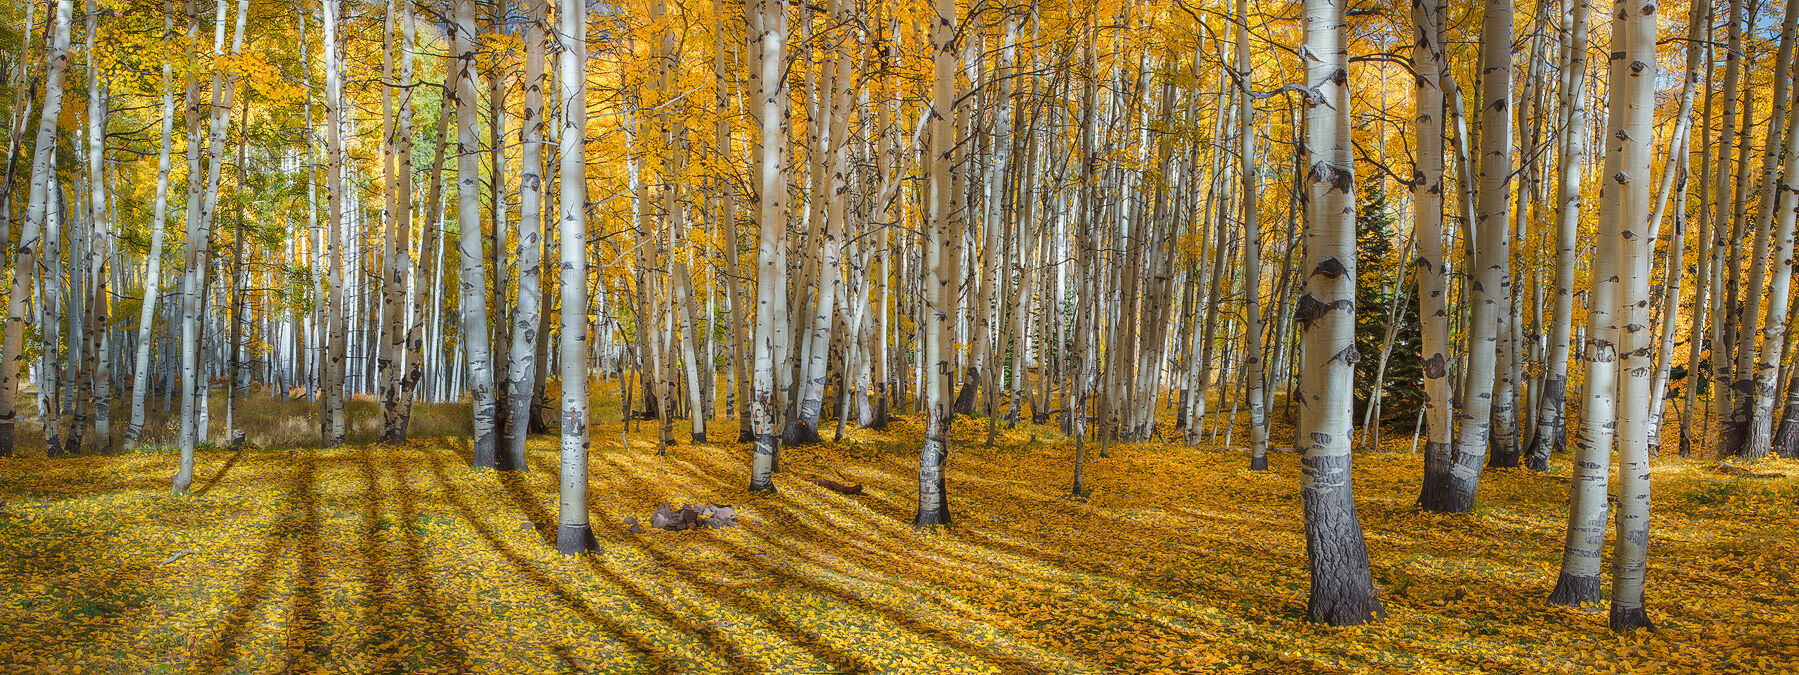 Sun shines through the aspen forest creating long tall shadows on the golden leaves all over the ground.